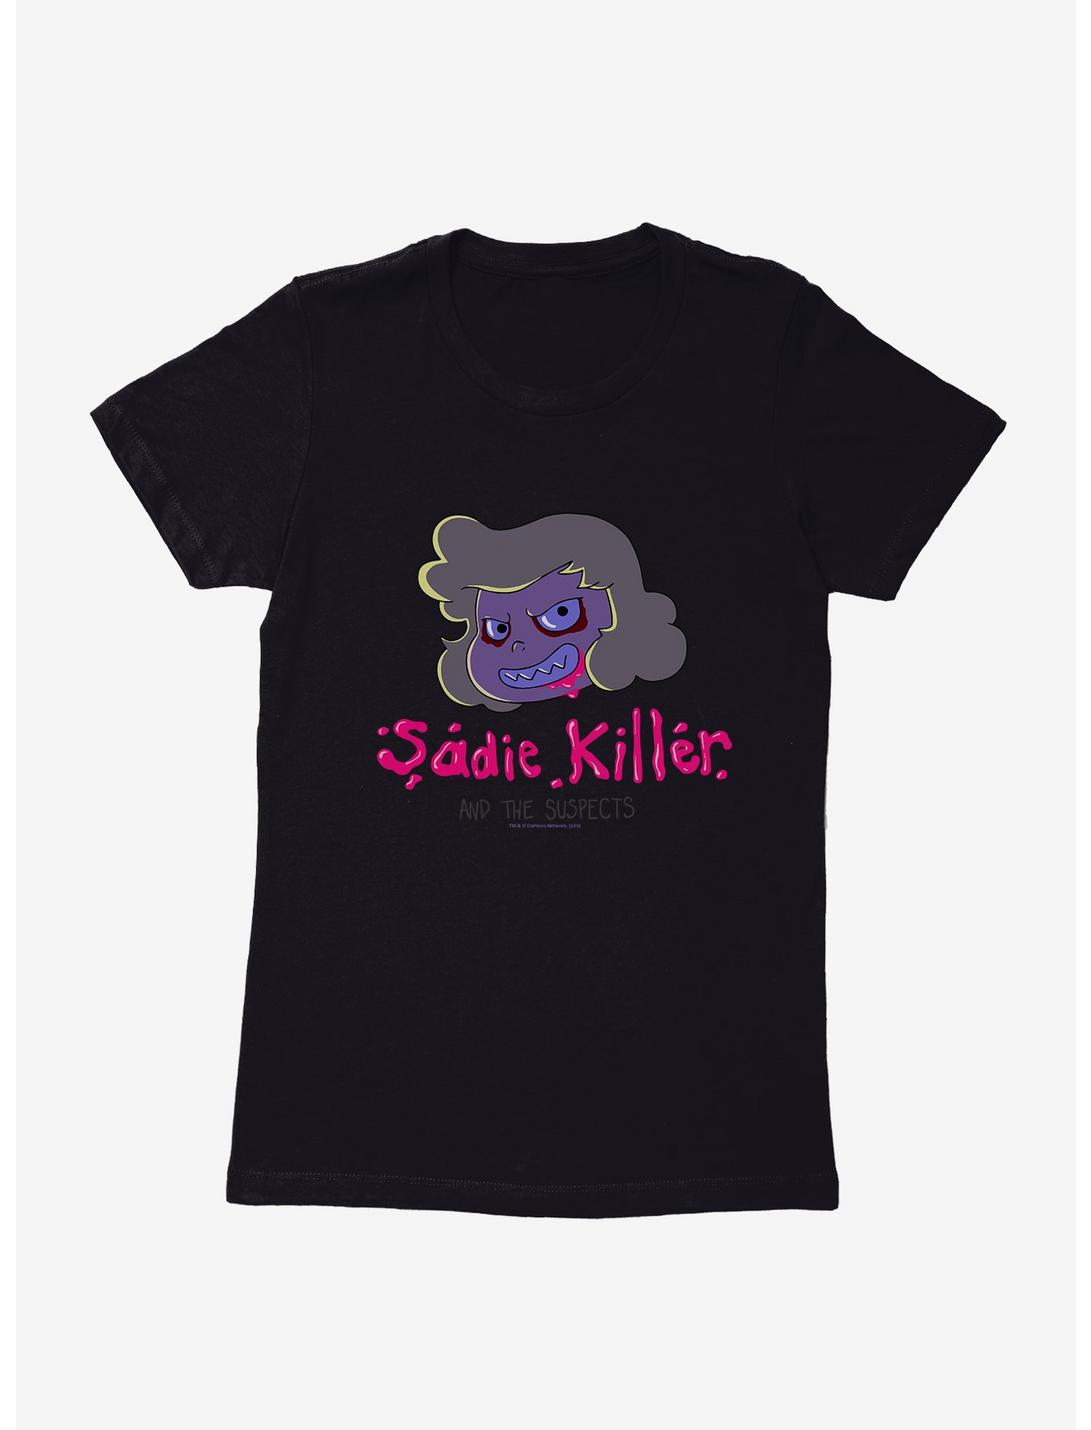 Steven Universe Sadie Killer And The Suspectss Band Logo Womens T-Shirt, , hi-res